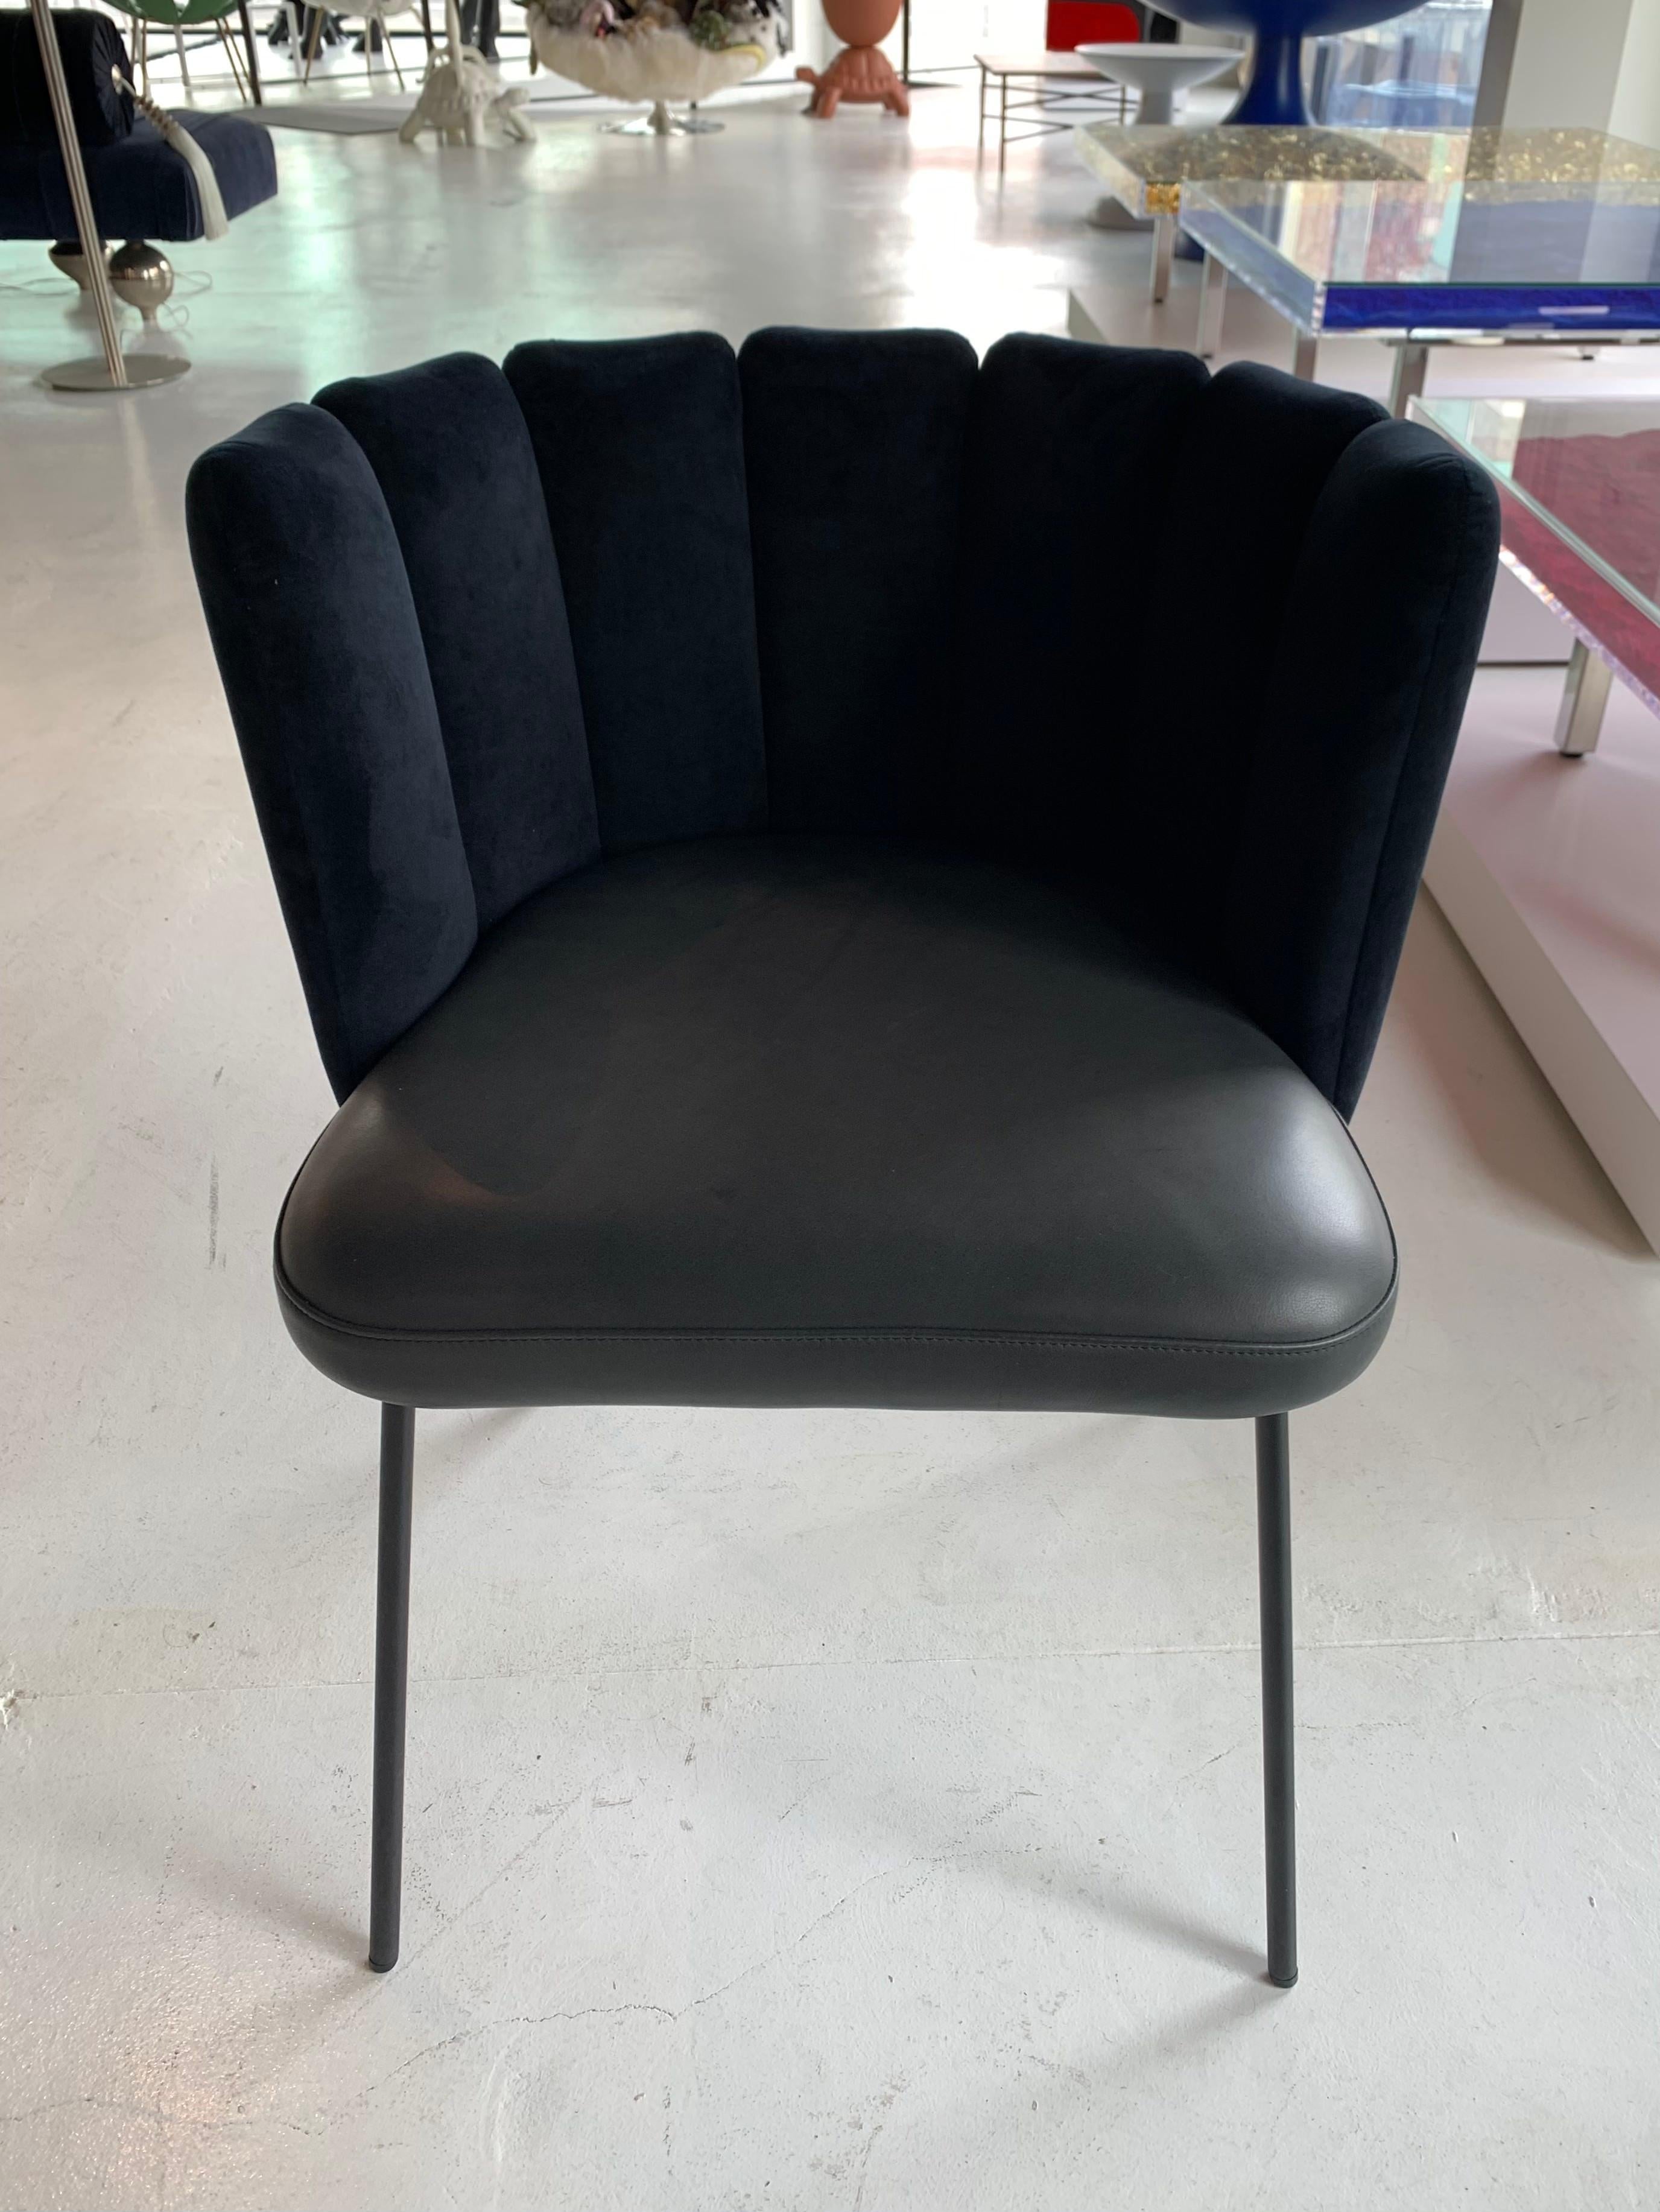 In stock in Los Angeles

Gaia velvet and leather upholstered dining armchair.
The GAIA collection is a new creation designed by the well-known Italian designer Monica Armani.? GAIA’s sensuous shapes and tangible comfort are guaranteed to